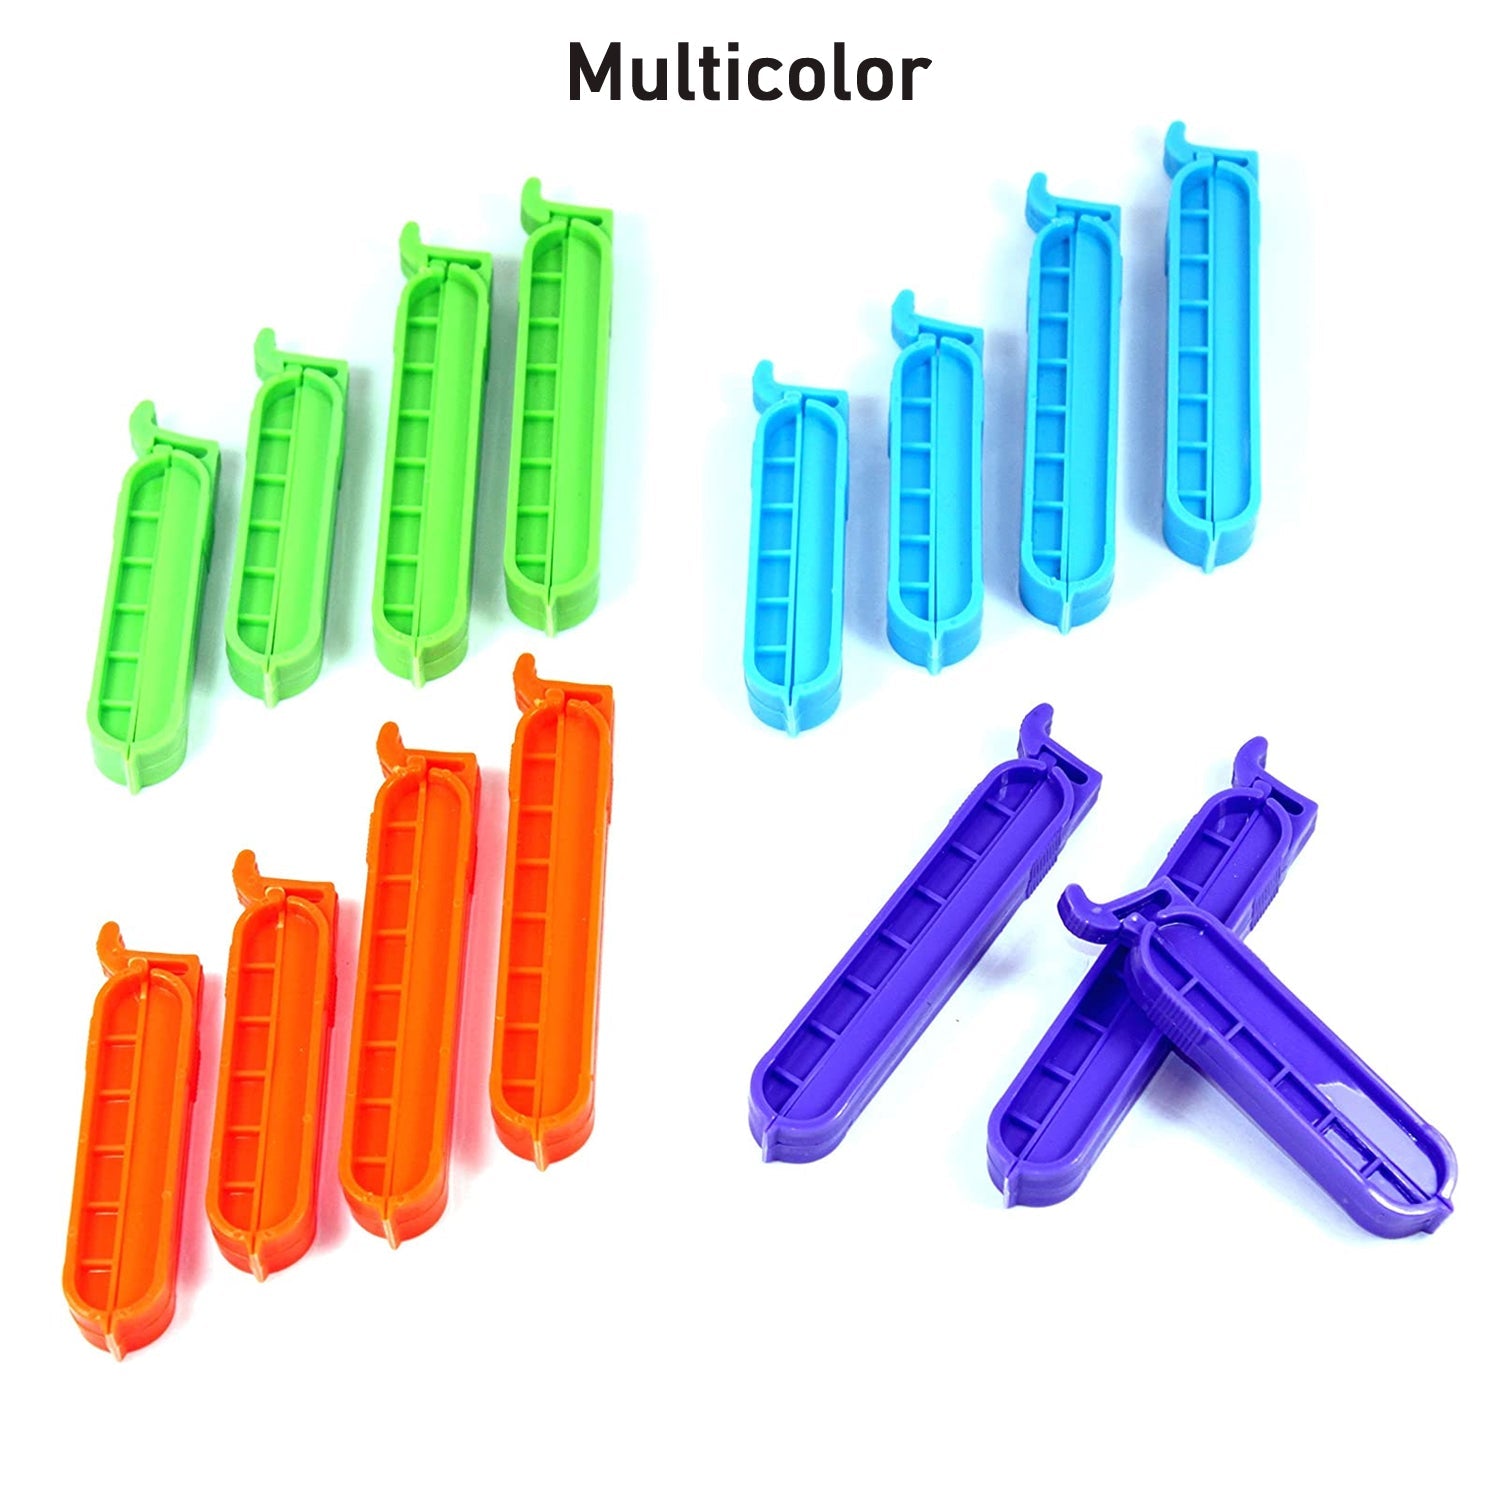 4068 Sealing clips, clips for food bags, freezer bag clips, plastic for packaging sweets and snacks in the kitchen DeoDap